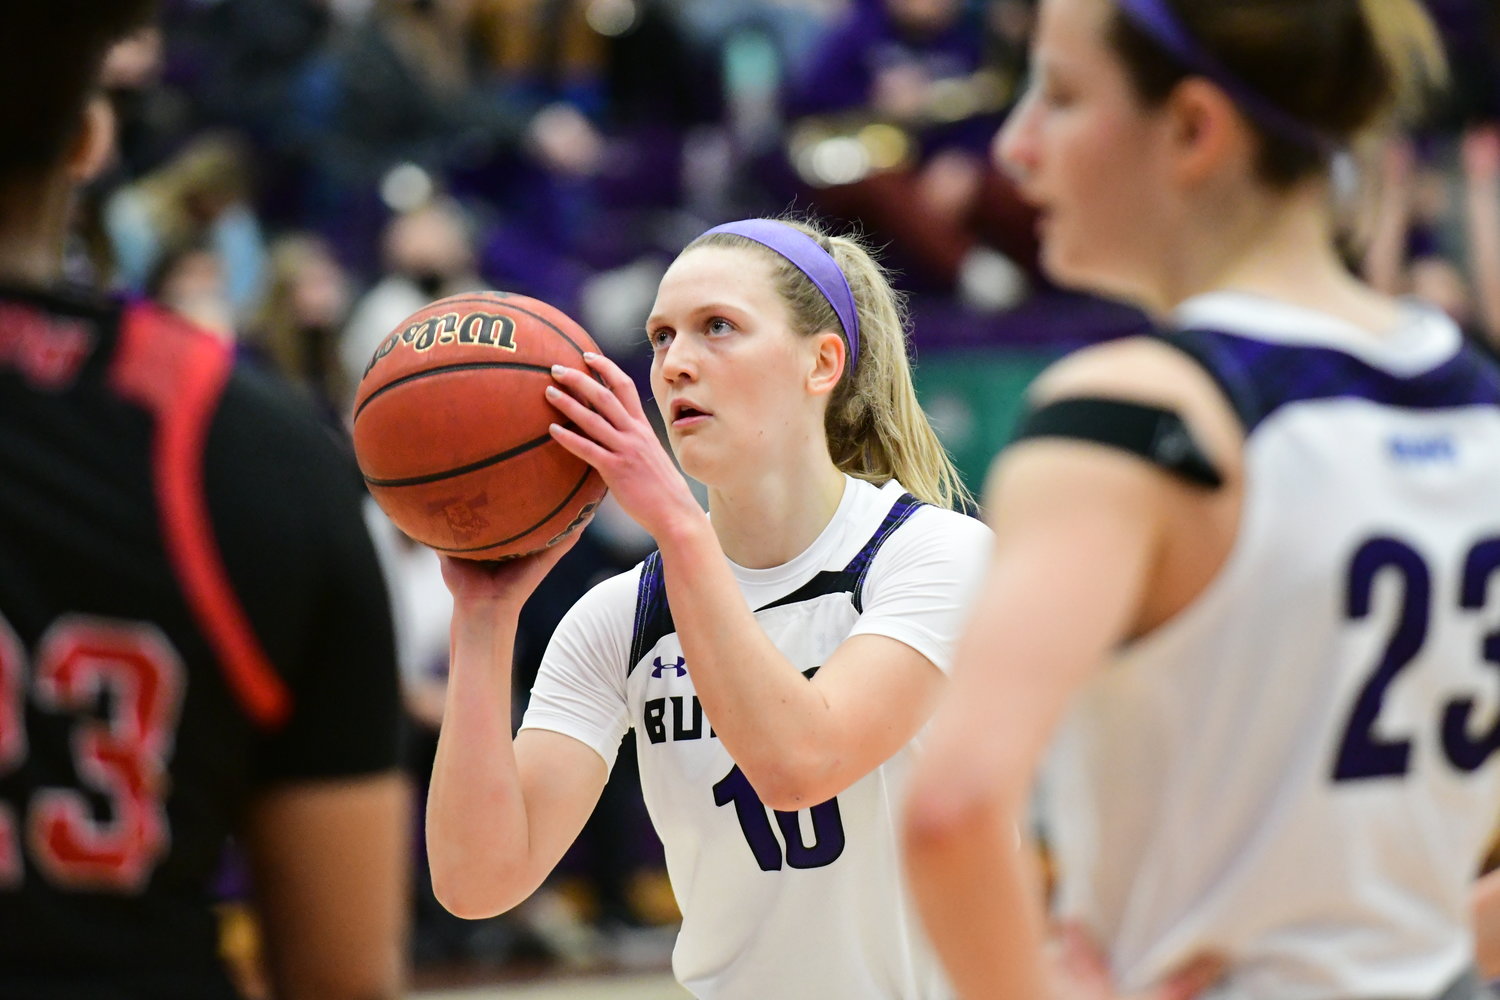 Action from a women's basketball game between Truman and Drury on Jan. 17, 2022.